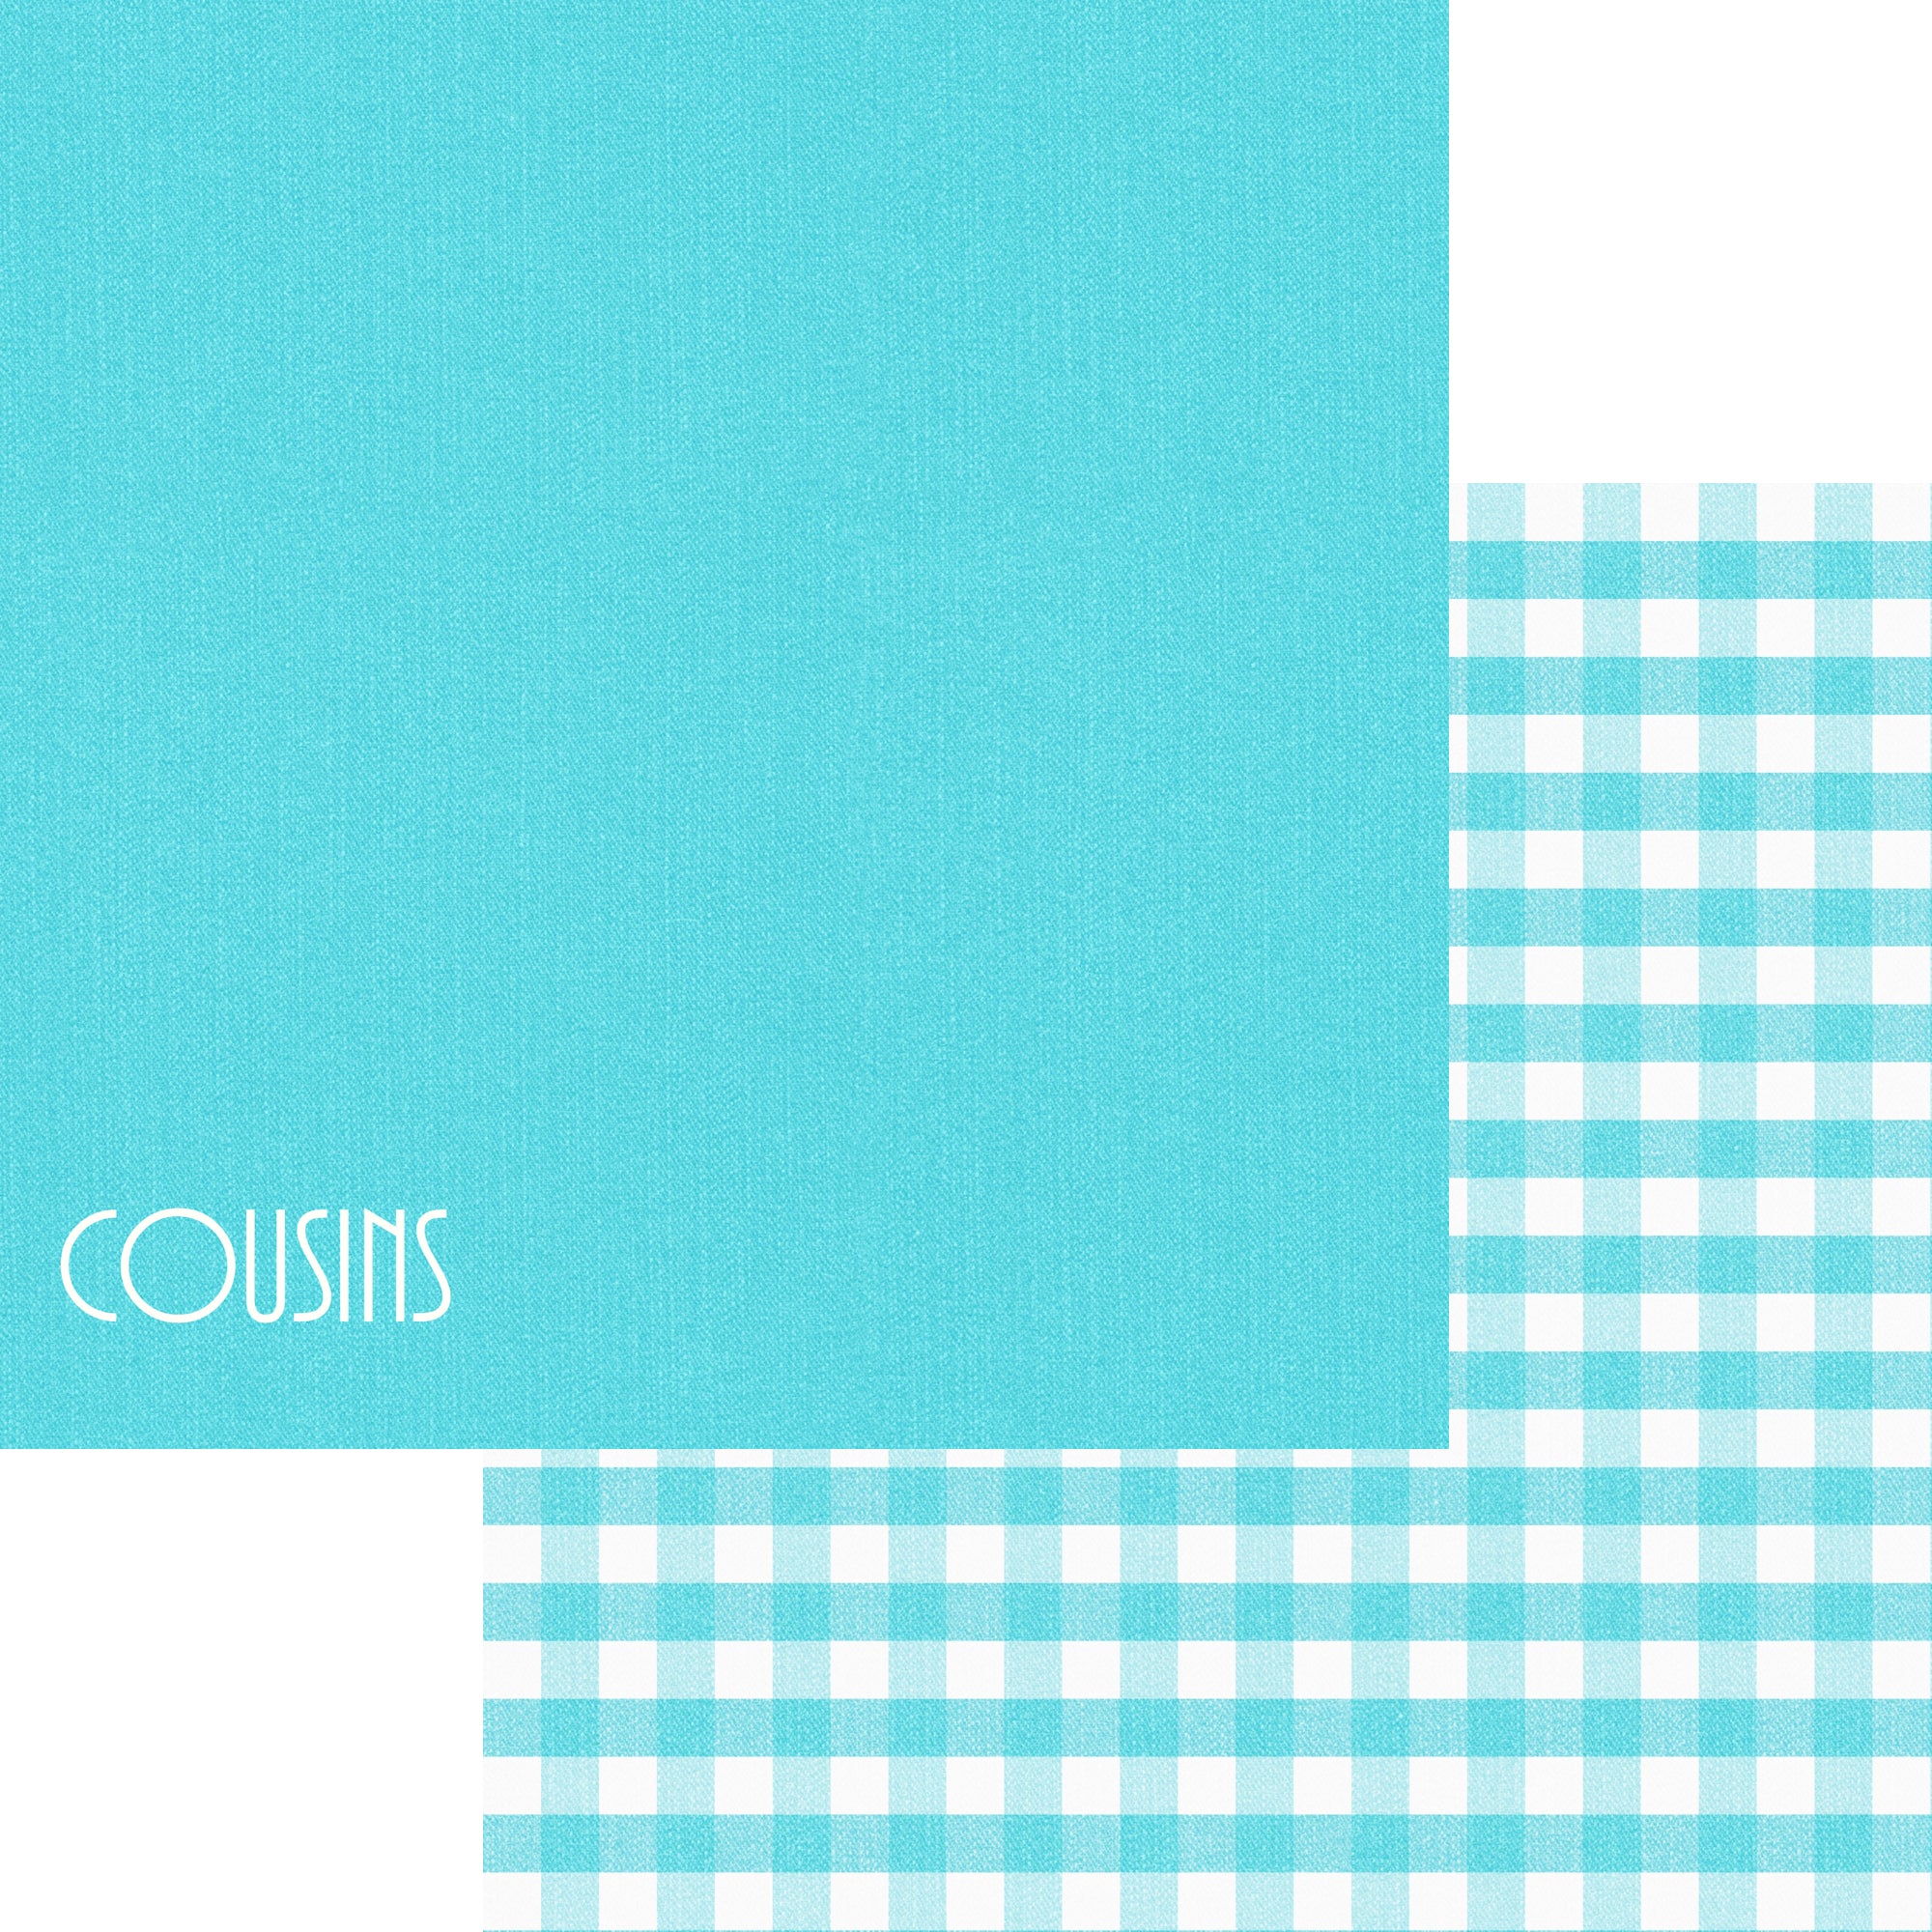 Family Collection Cousins 12 x 12 Double-Sided Scrapbook Paper by SSC Designs